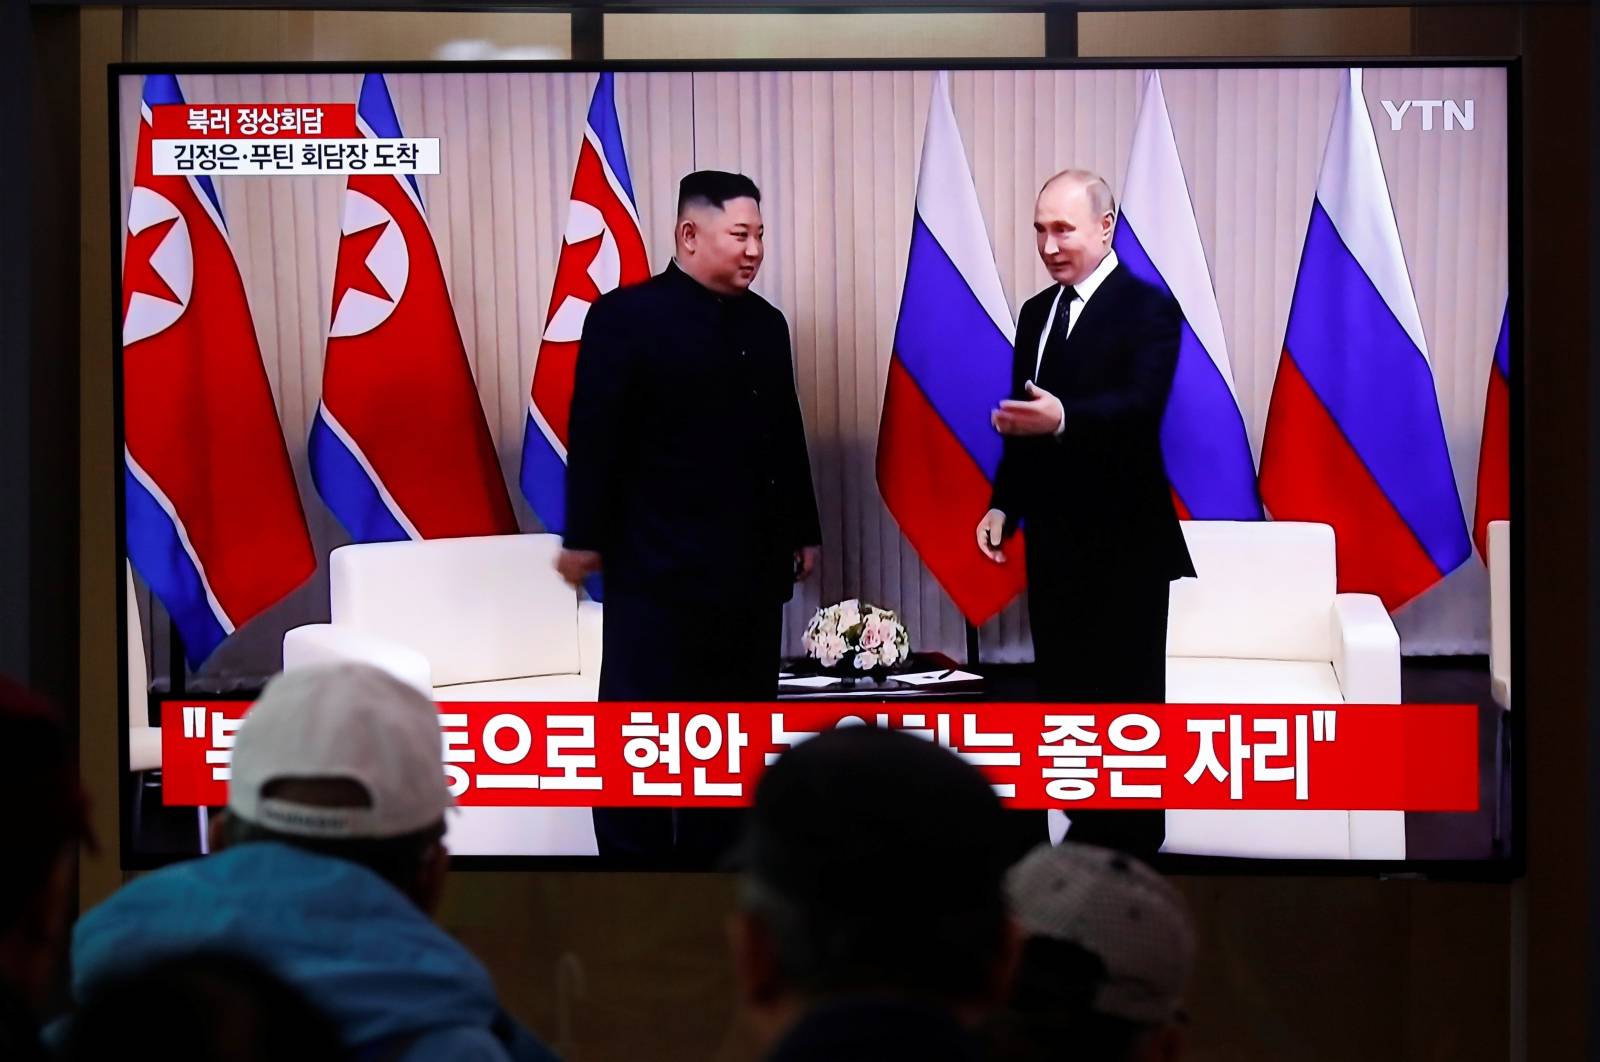 South Korean people watch a TV broadcasting a live news on a meeting between North Korean leader Kim Jong Un and Russia President Vladimir Putin, in Seoul